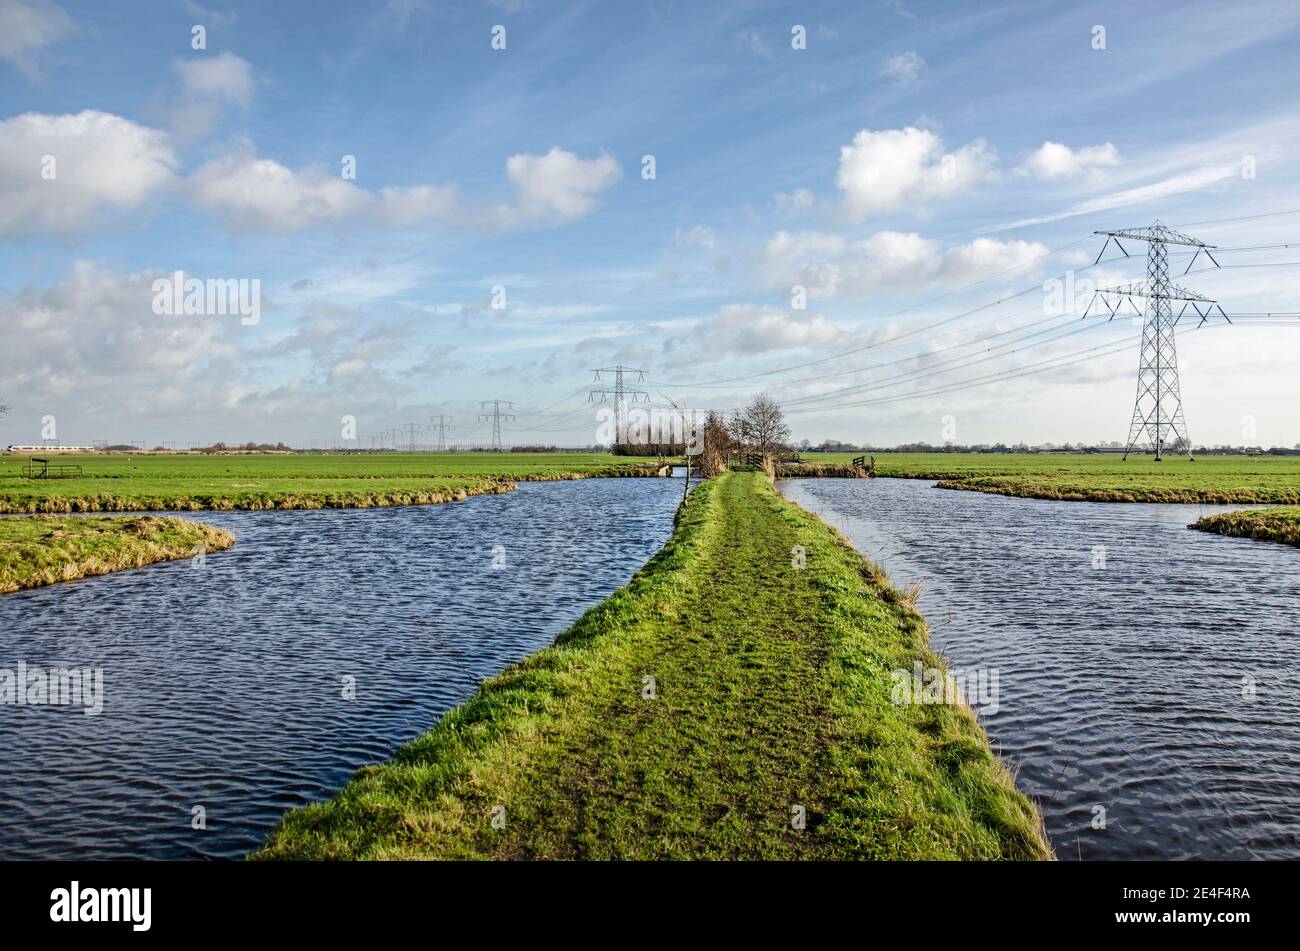 Steinse Tiendweg hiking trail in the polders east of Gouda, the Netherlands, with canals, ditches, meadows and electricity pylons Stock Photo